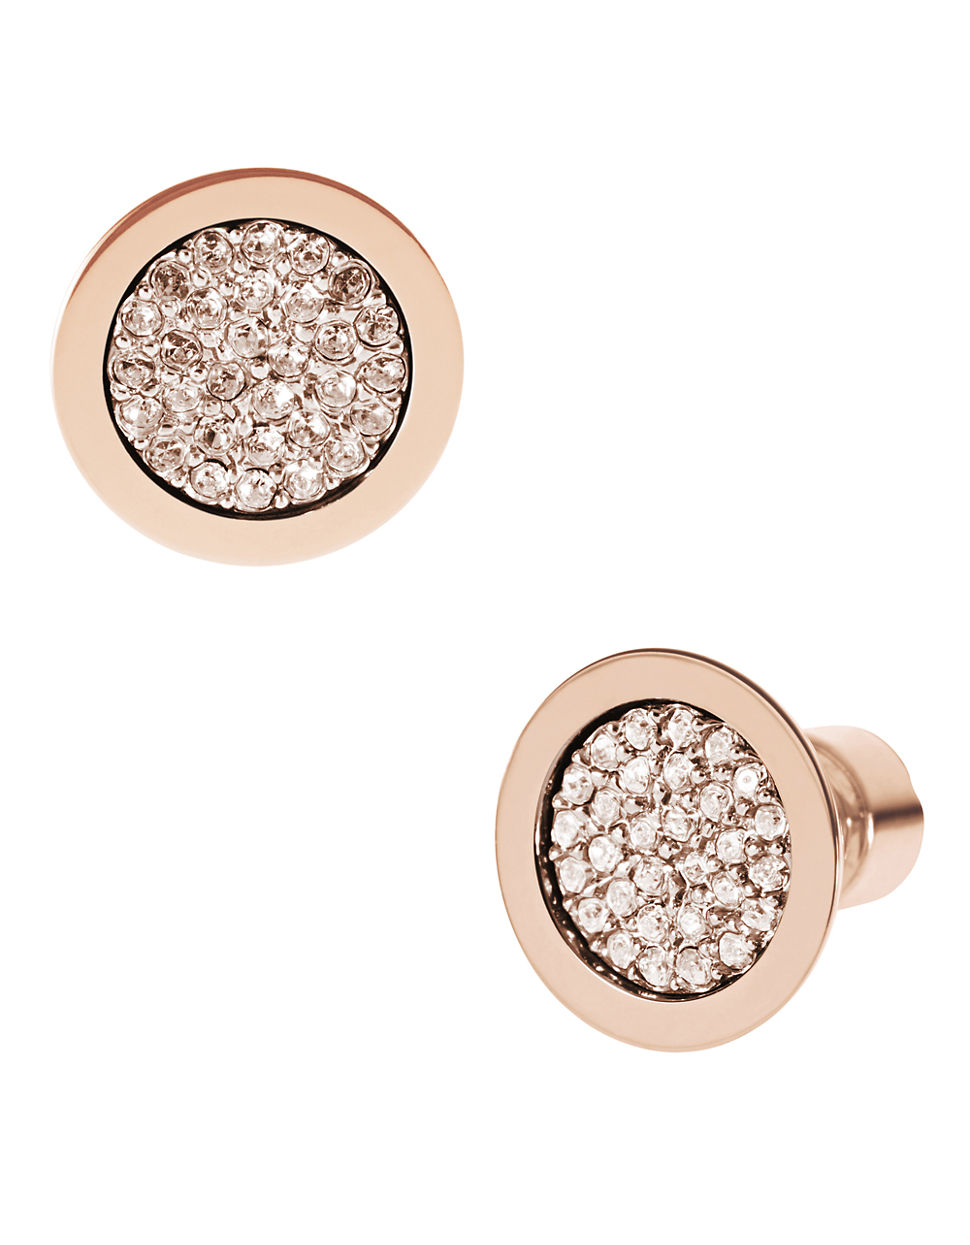 Michael Kors Rose Gold-Tone Pave Slice Stud Earrings in Gold